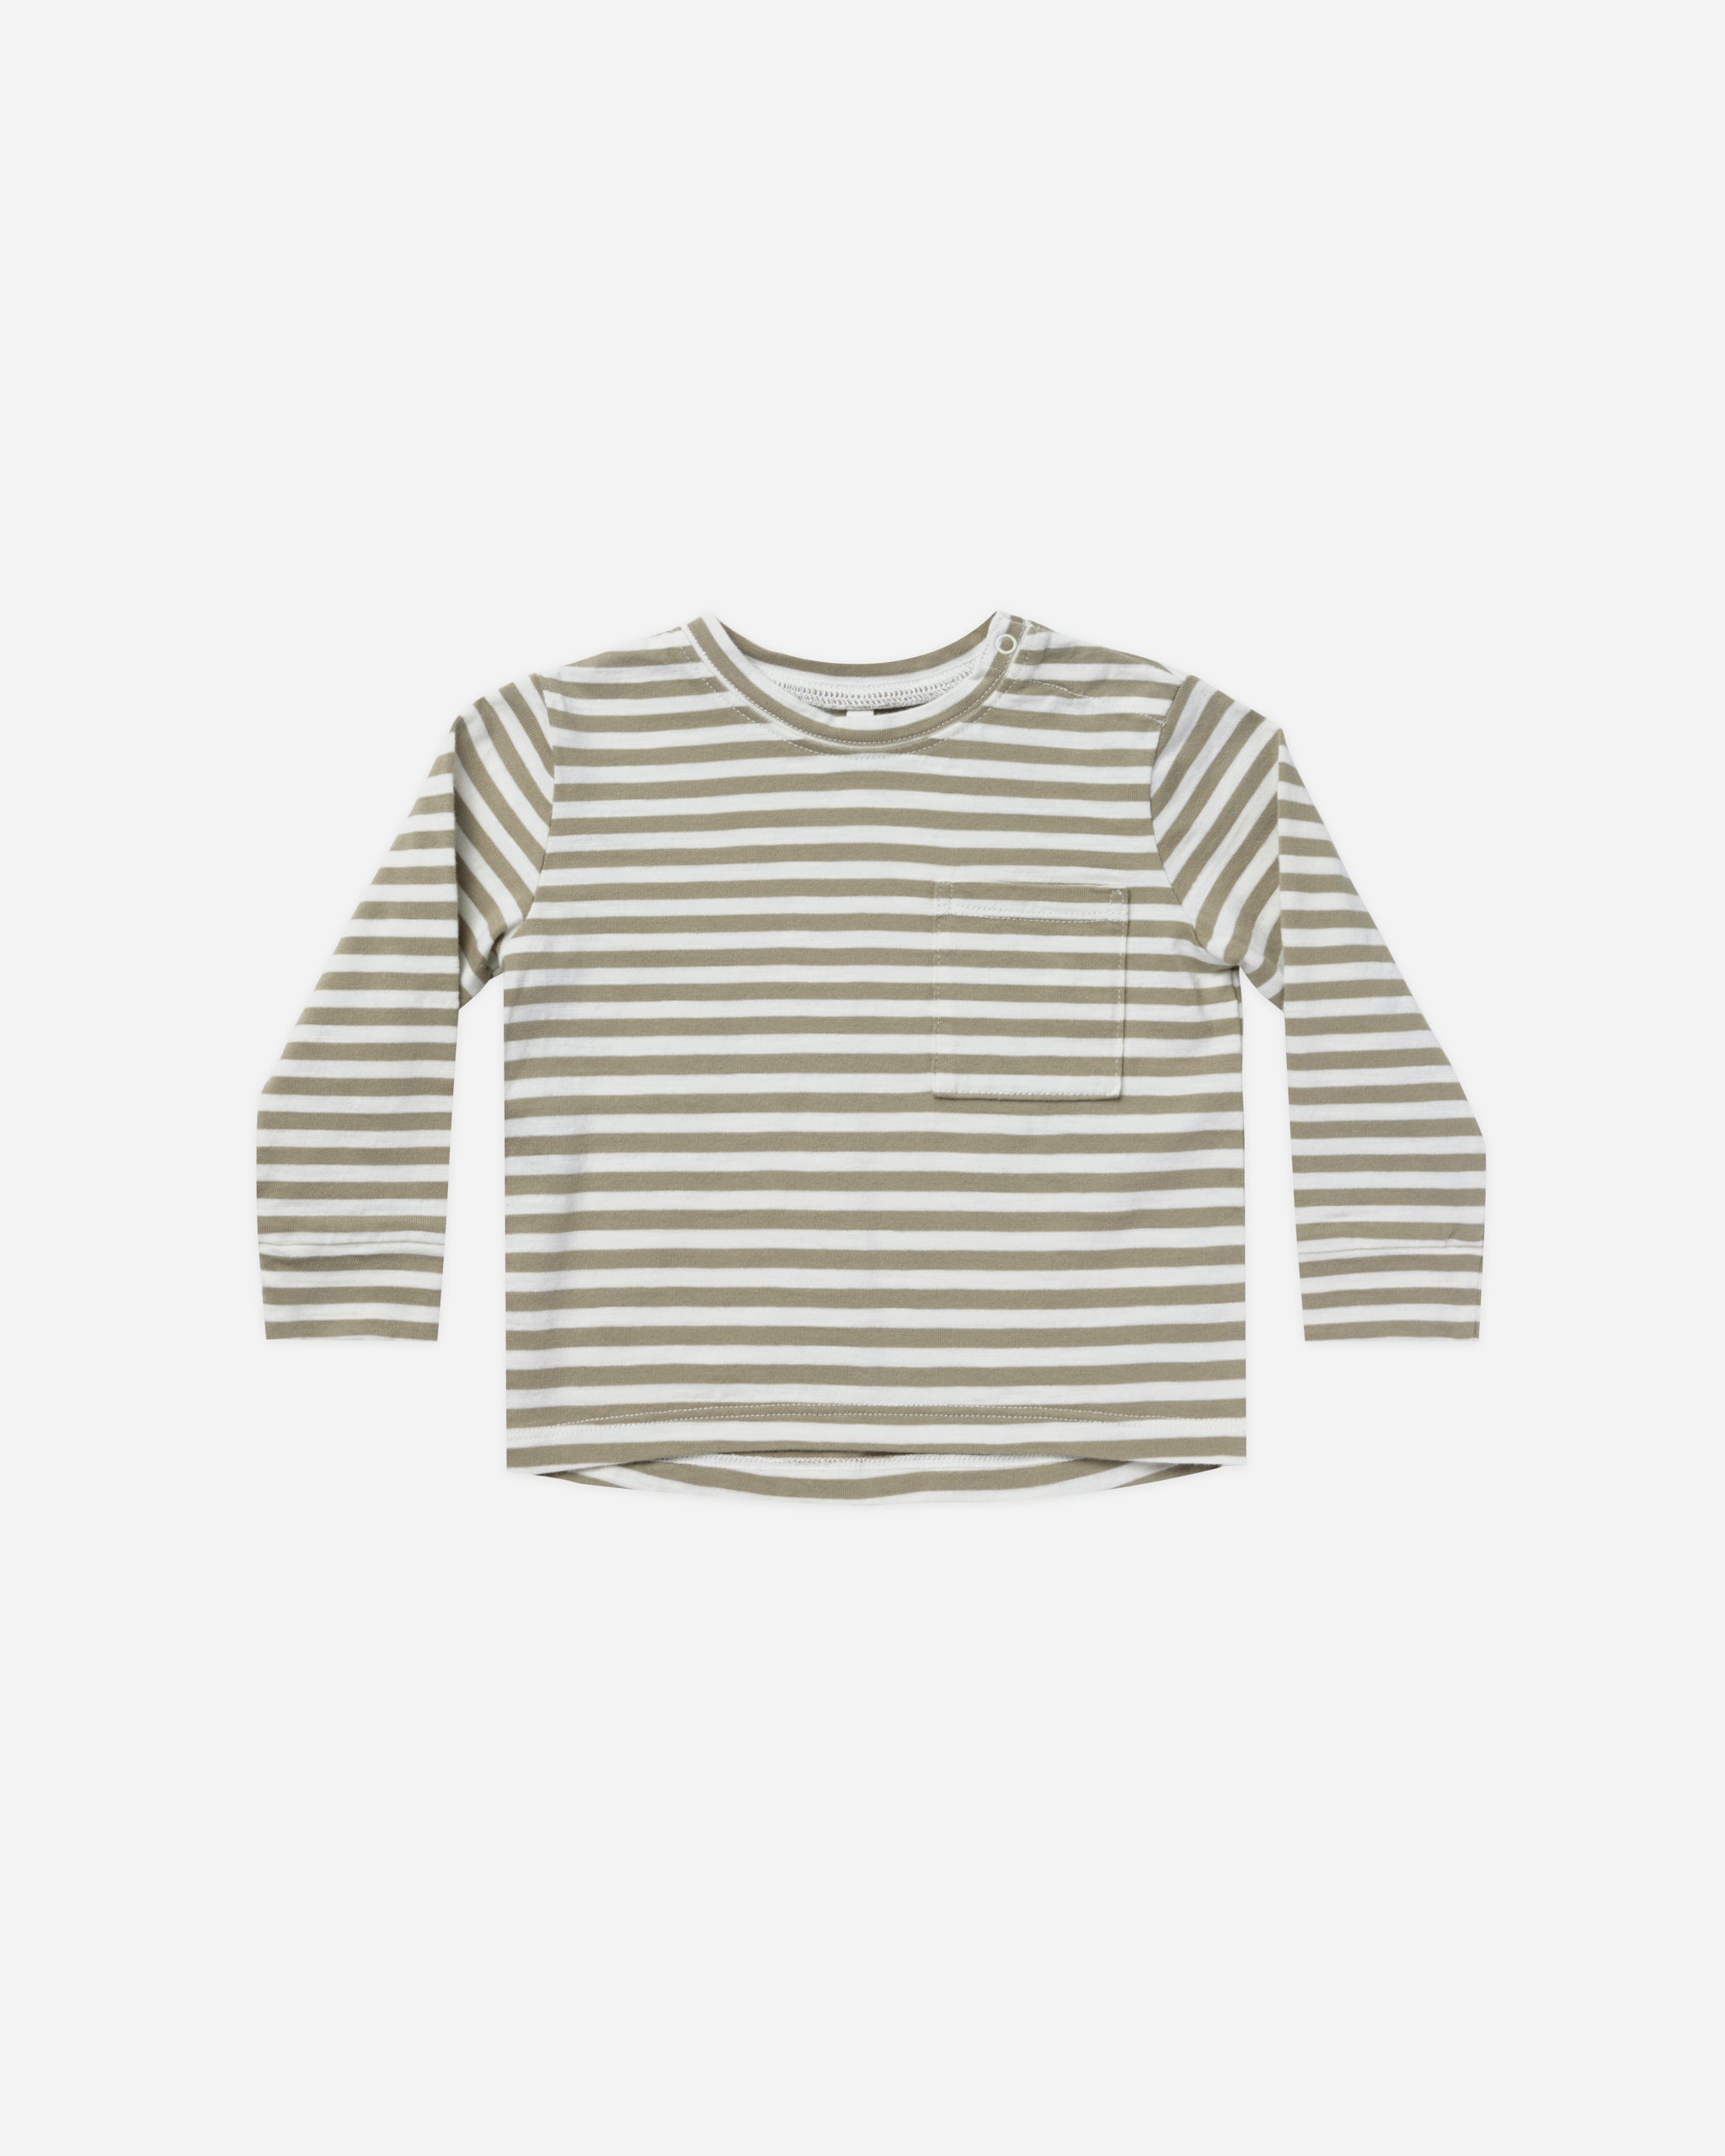 Long Sleeve Skater Tee || Fern Stripe - Rylee + Cru | Kids Clothes | Trendy Baby Clothes | Modern Infant Outfits |